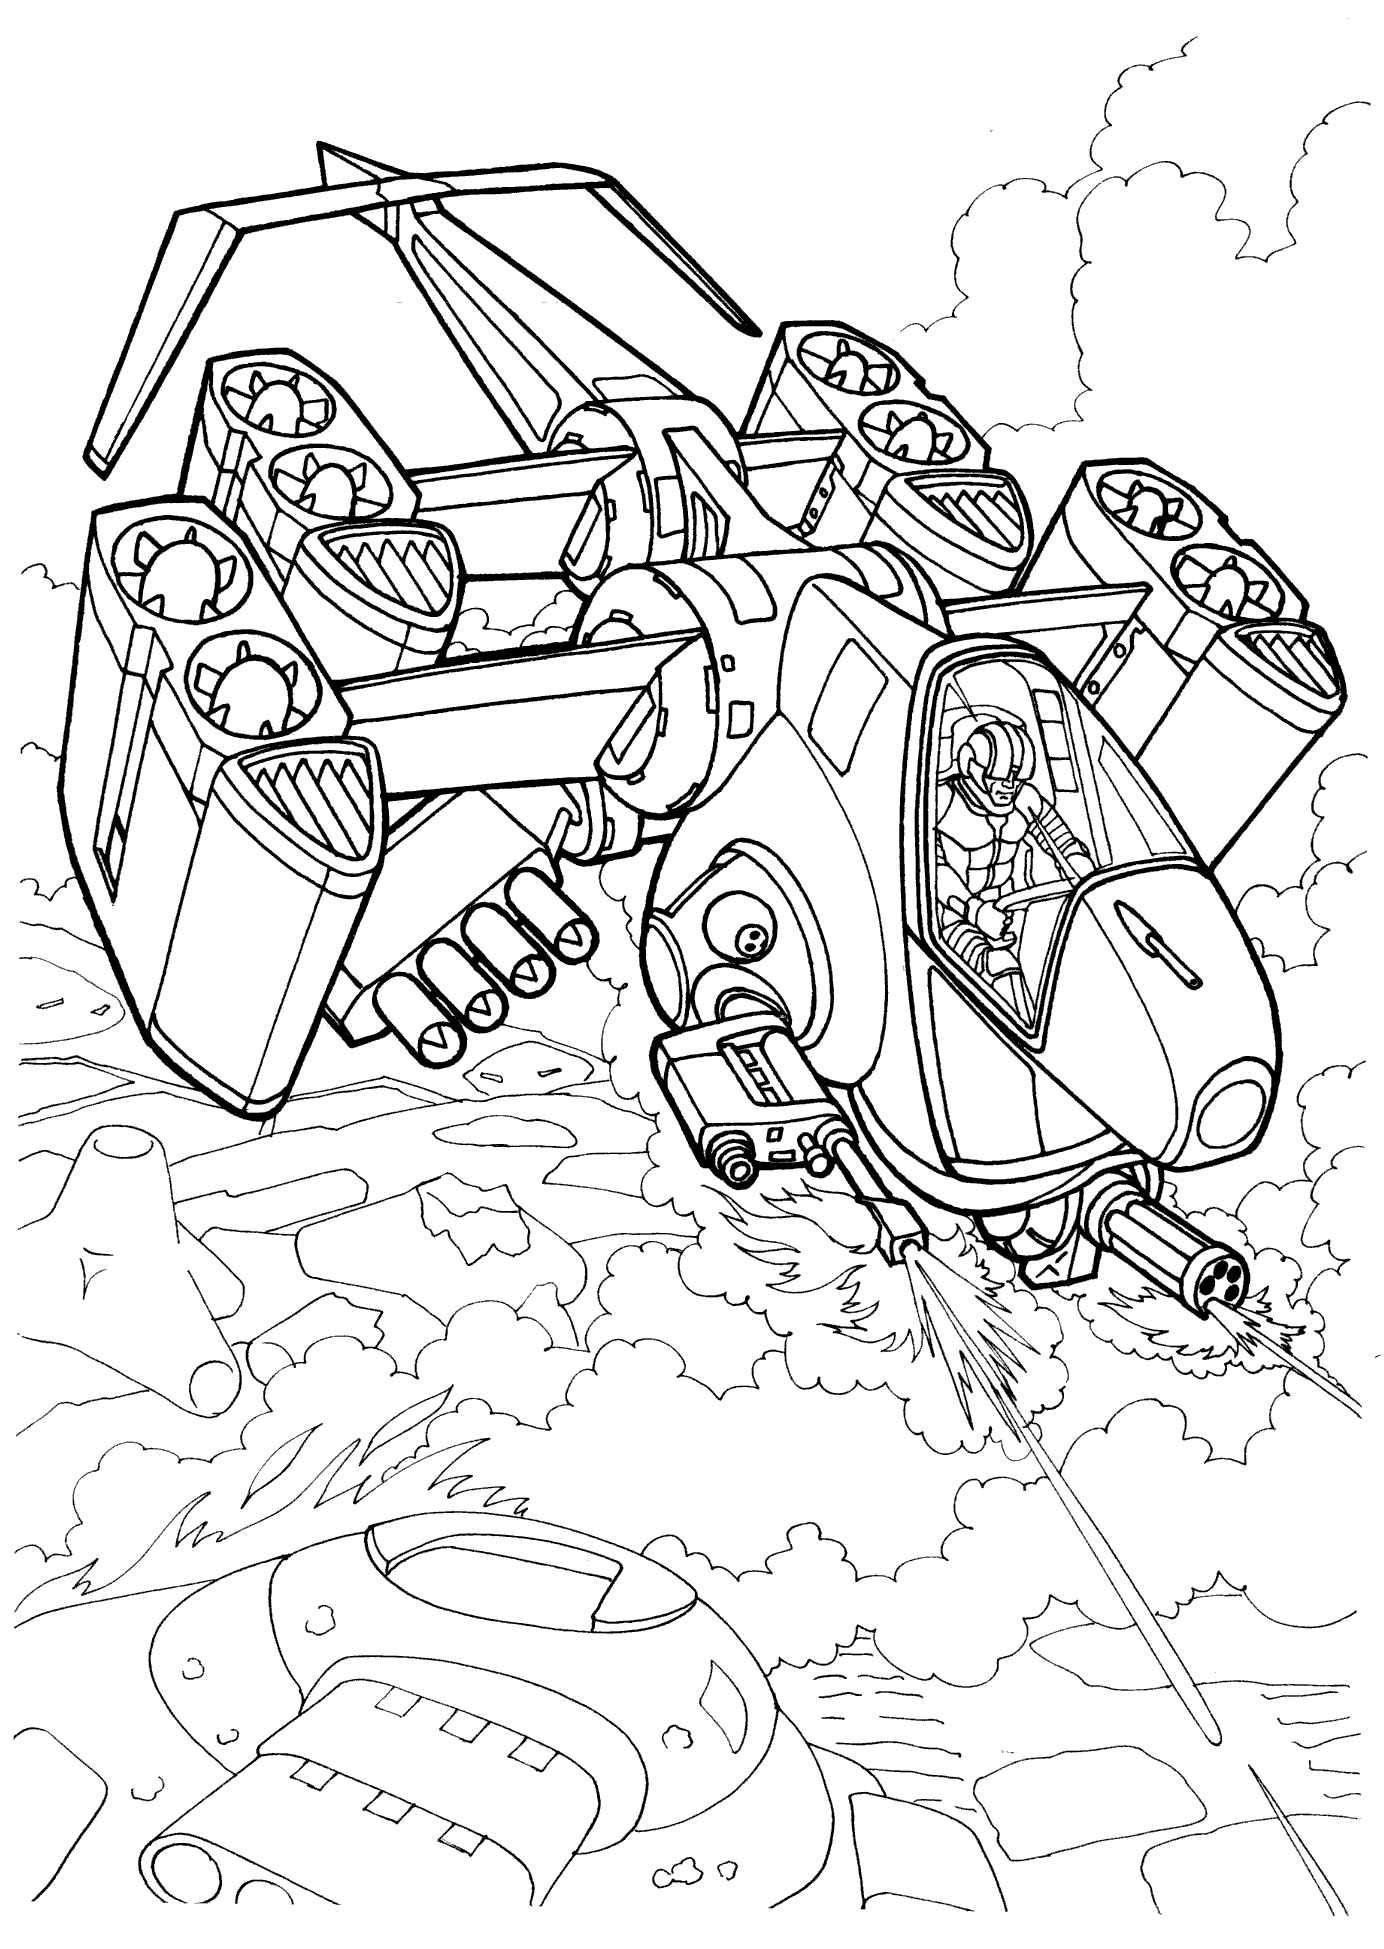 Coloring page - Combat space ship